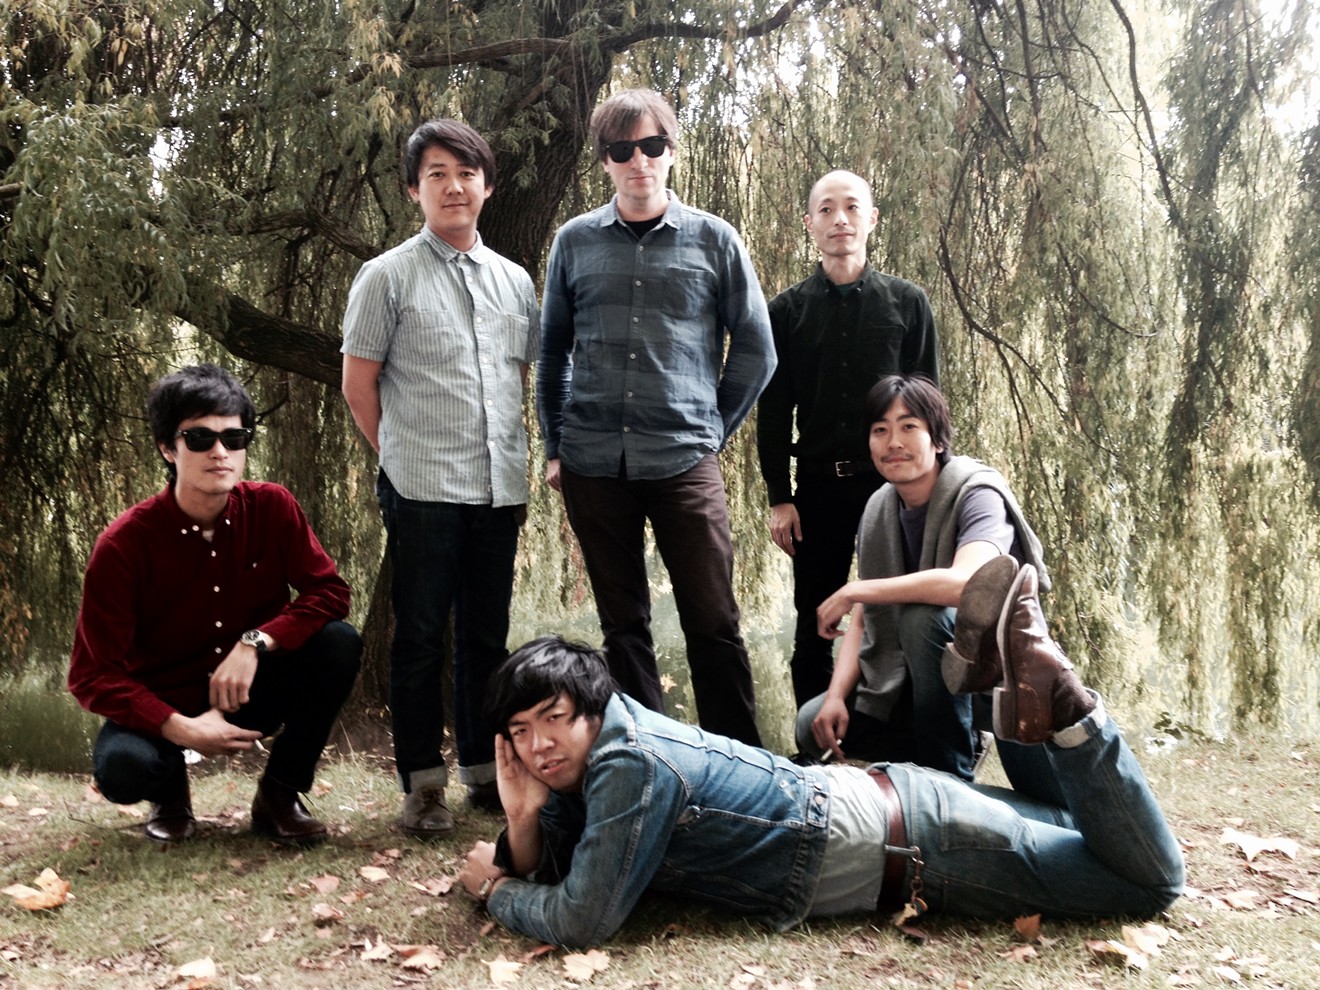 Yusuke Okada (front) and Jeff Burke (center back) formed Lost Balloons in 2015 after meeting in Japan.